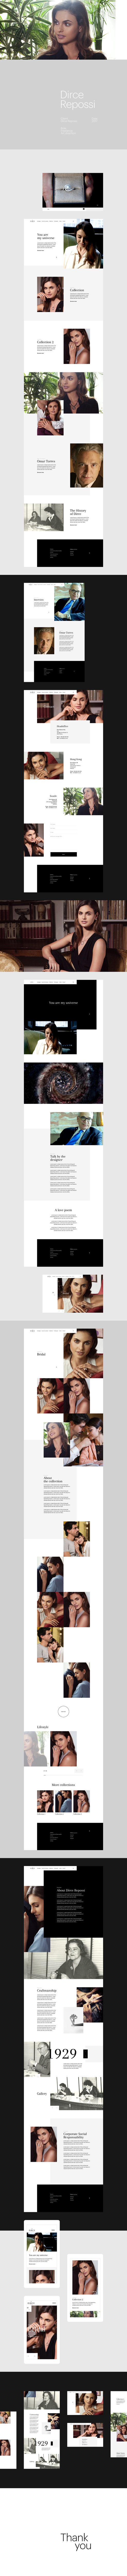 design typography   Website Photography  Layout Web Design 